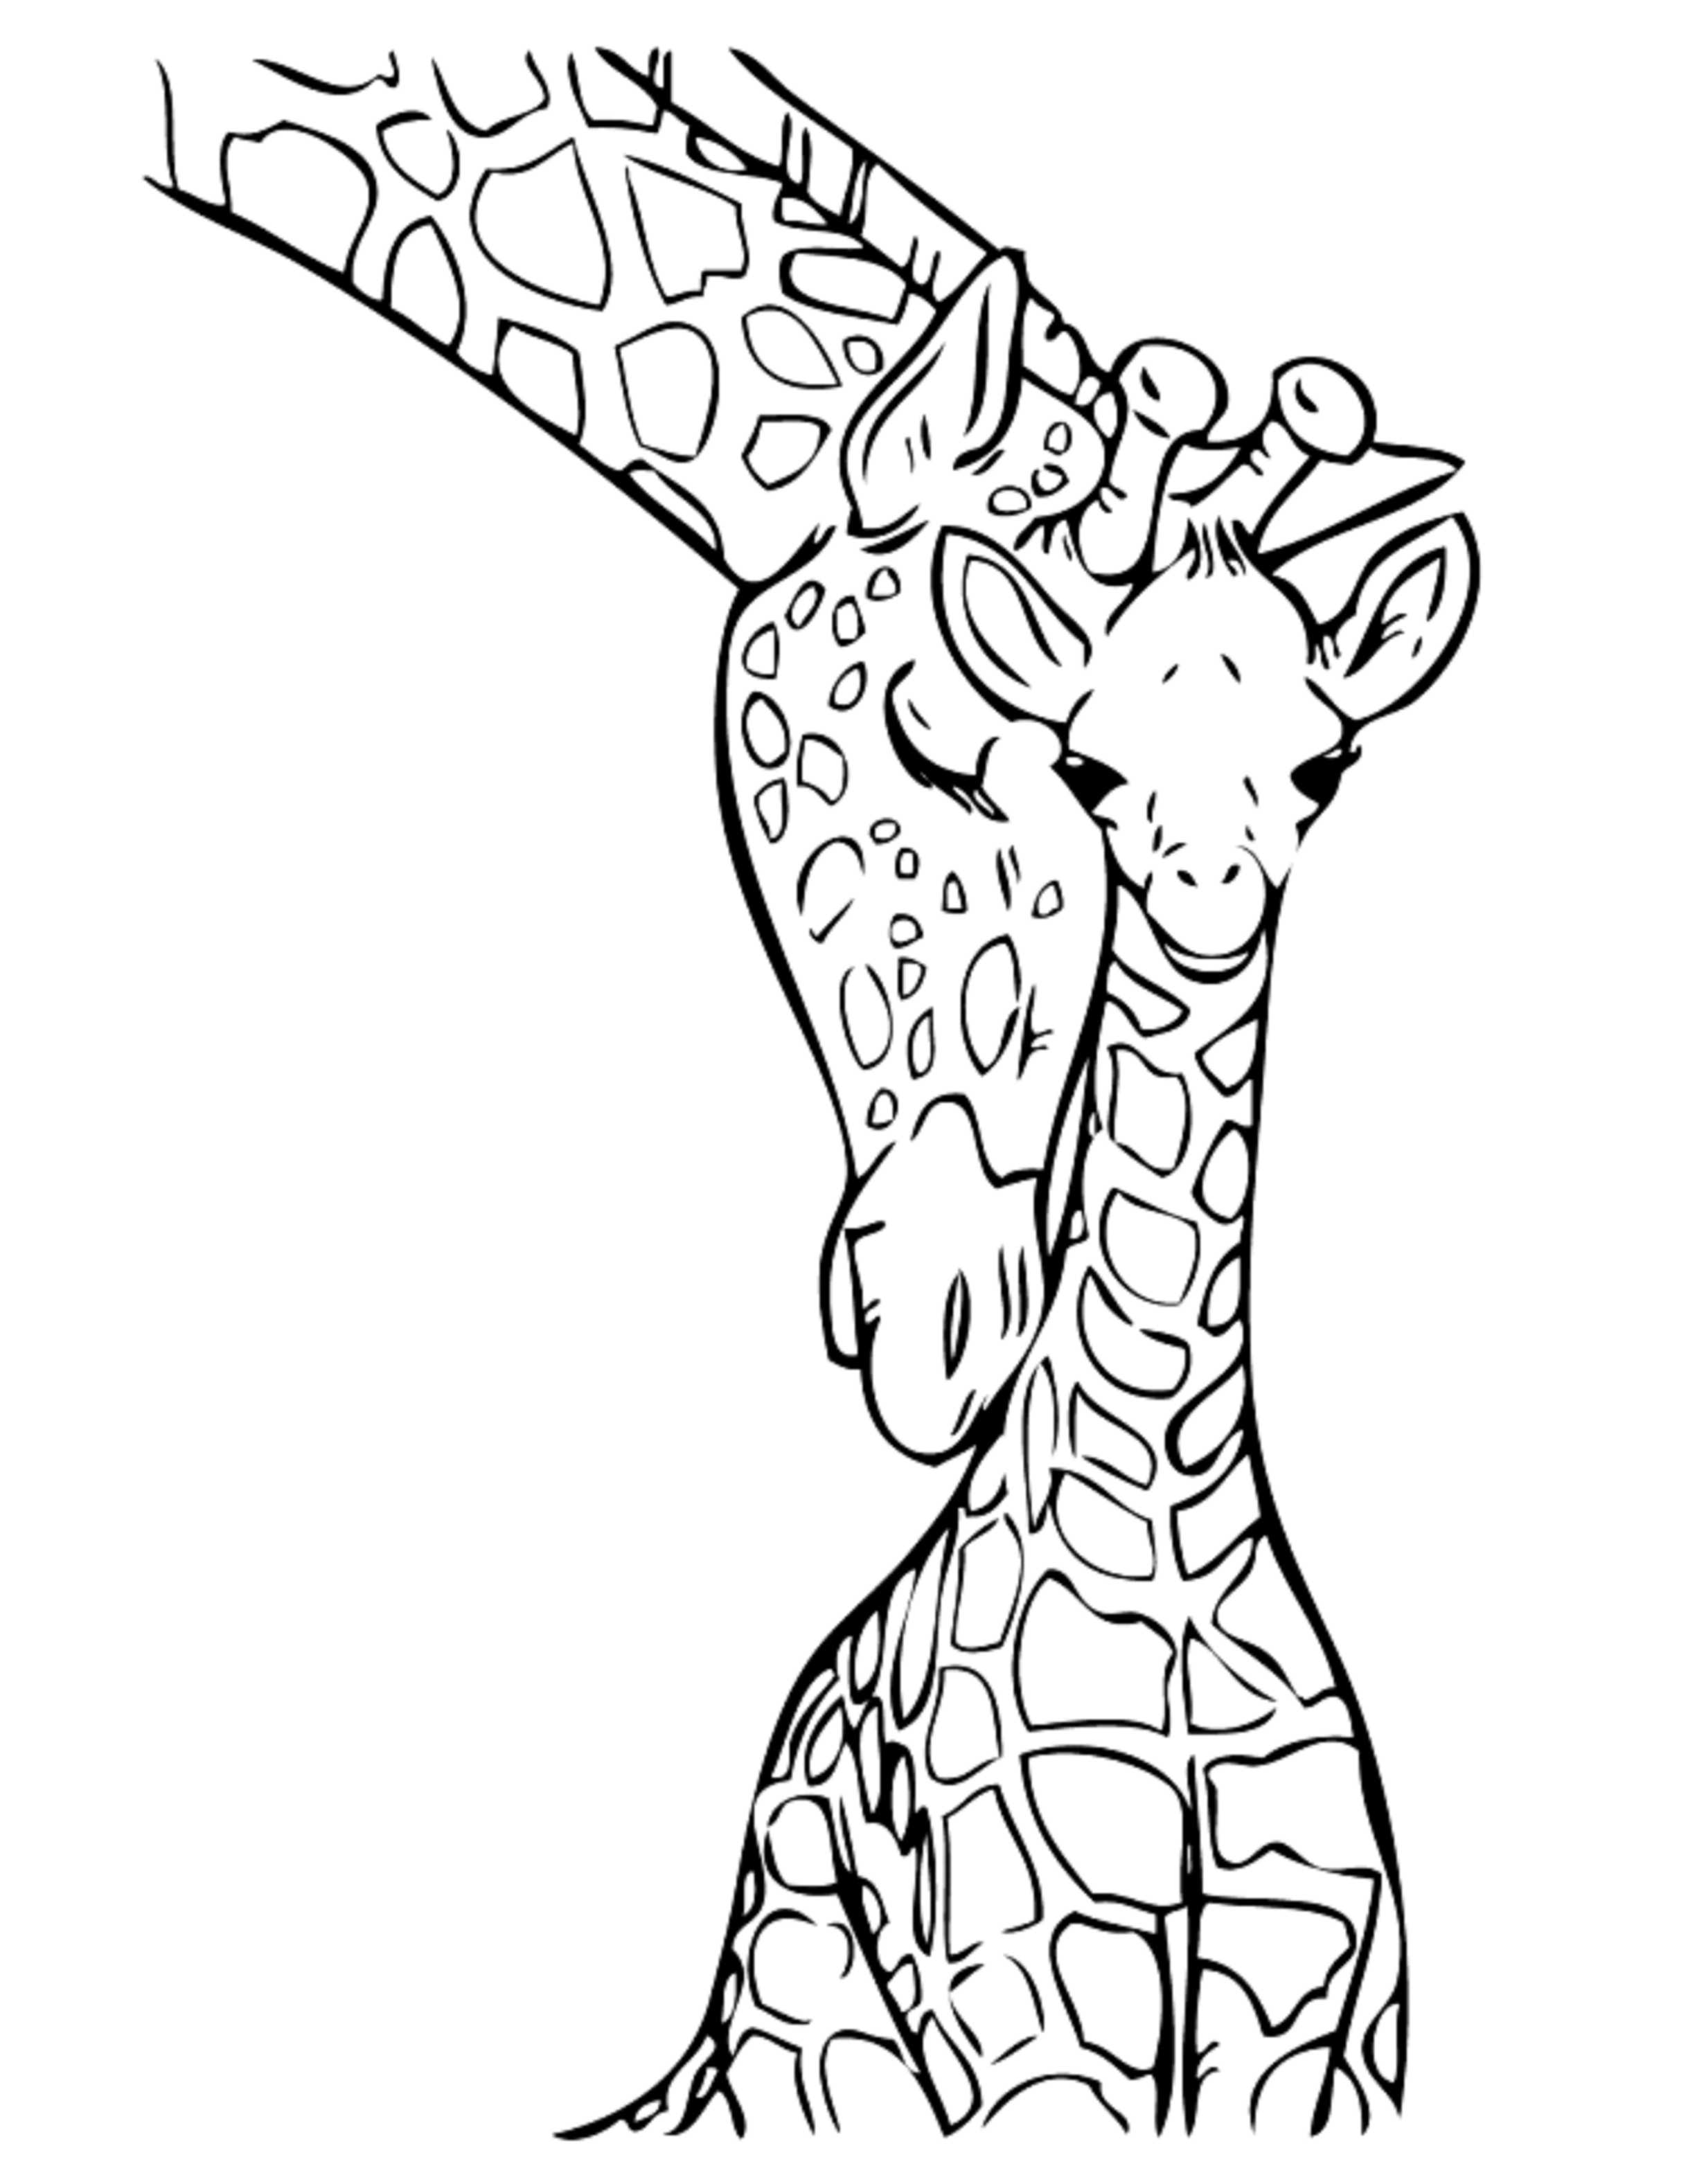 giraffe-coloring-pages-bestappsforkids